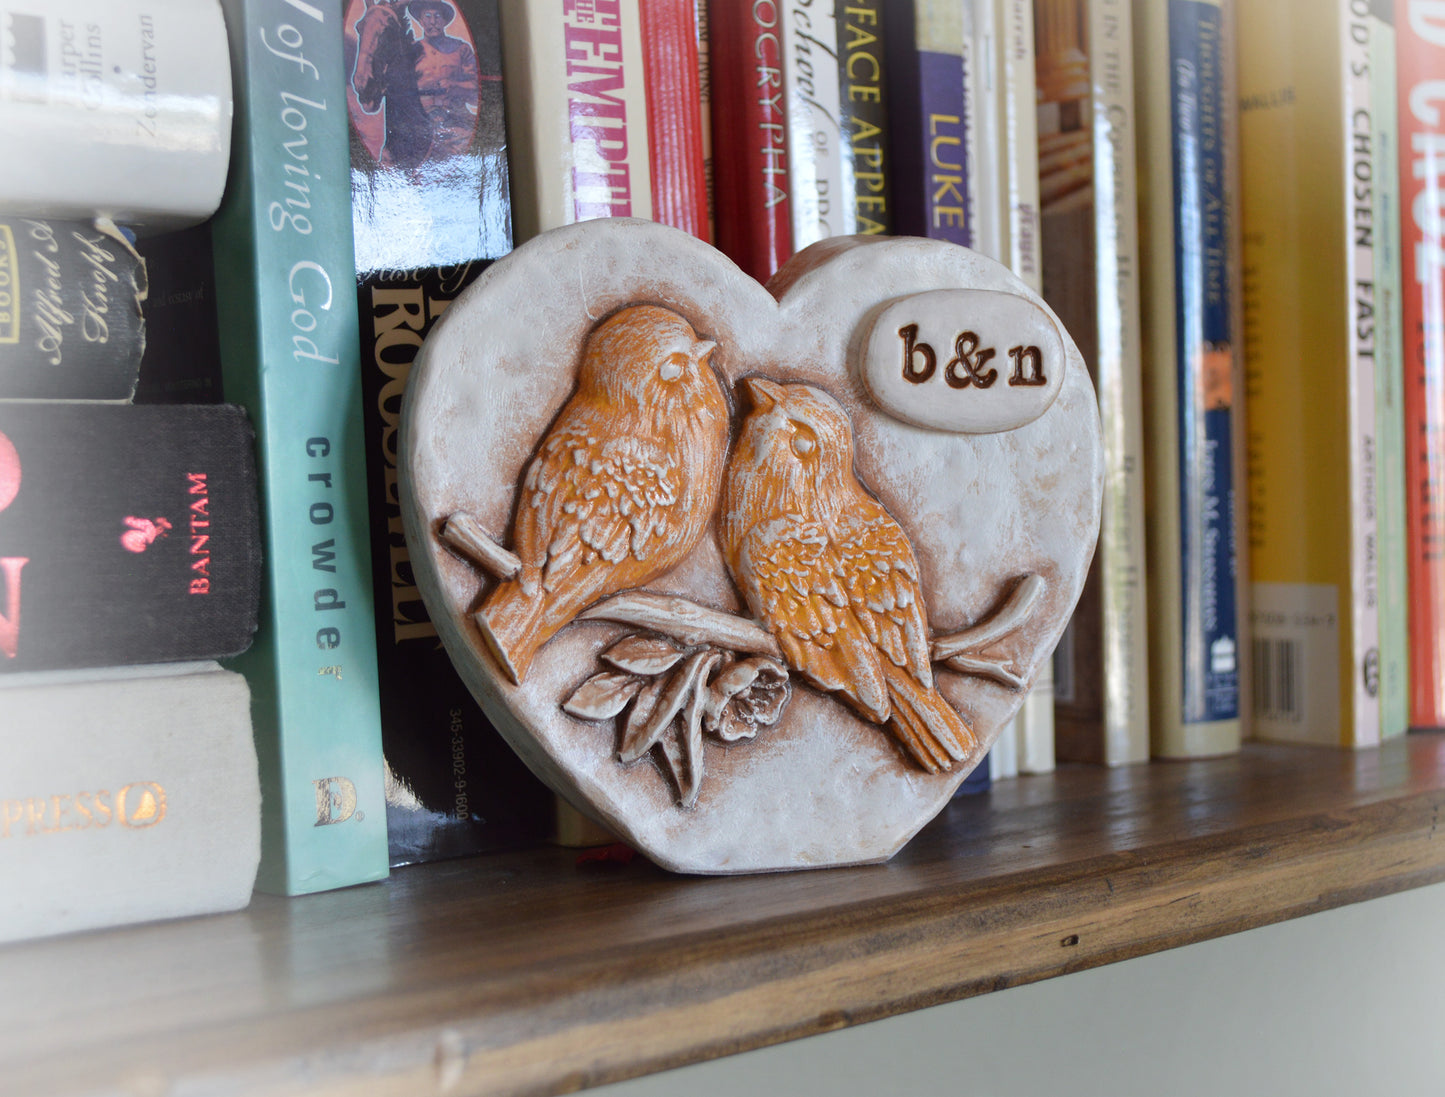 Lovebirds snuggling in a heart wedding cake topper / personalized with your initials and colors / great custom bespoke anniversary gift